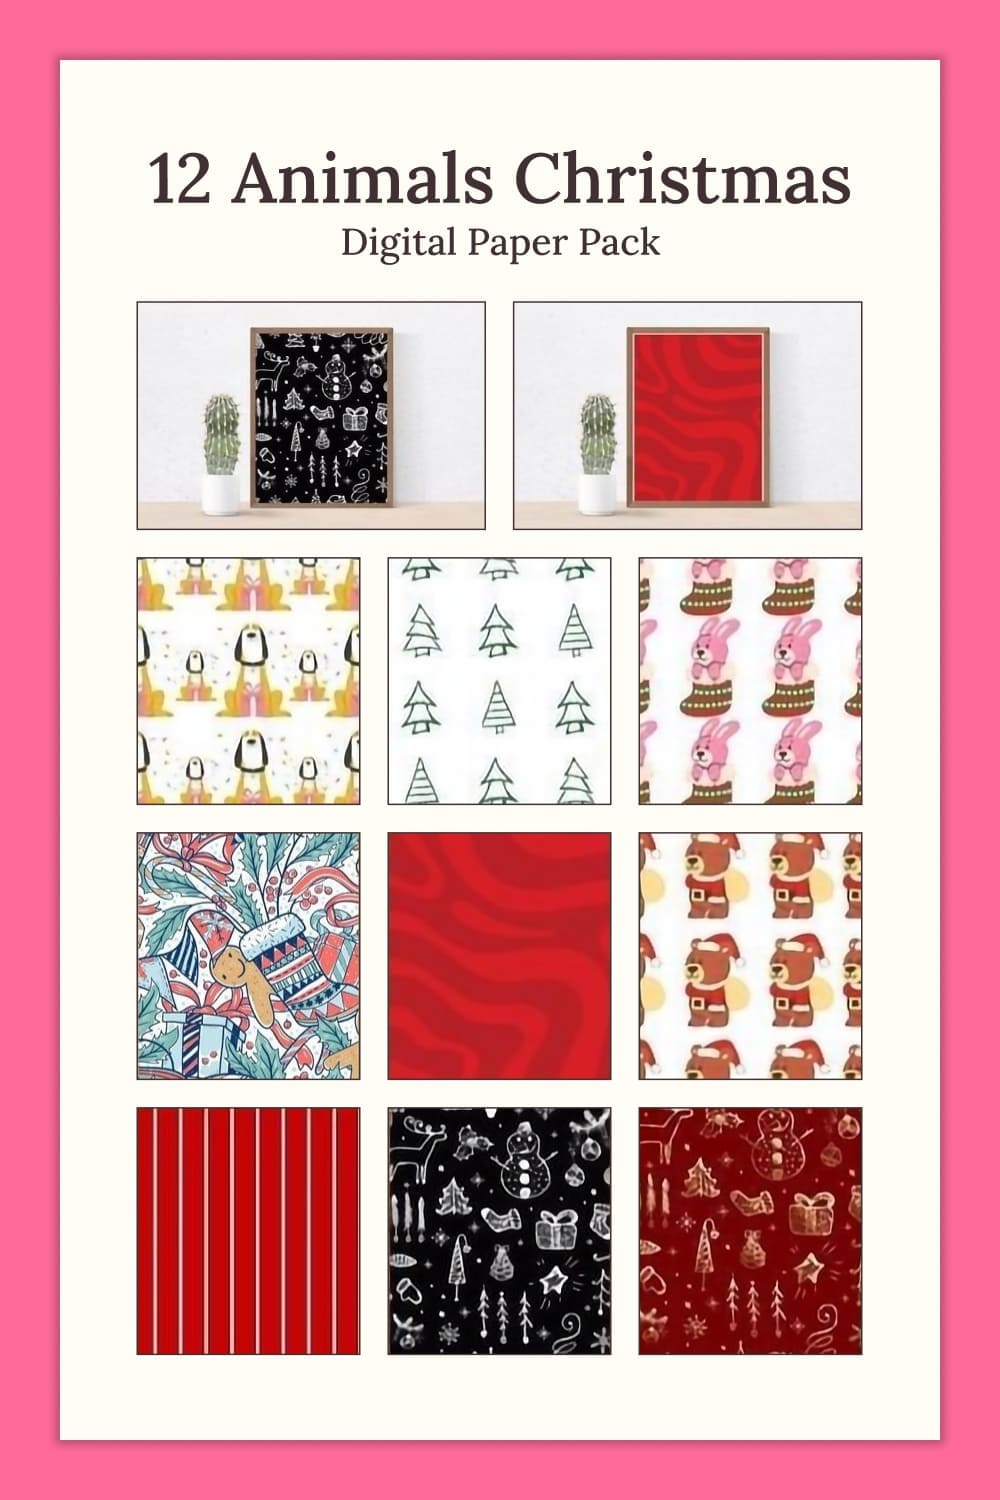 12 colorful patterns with the image of Christmas animals that can be used for accessories.